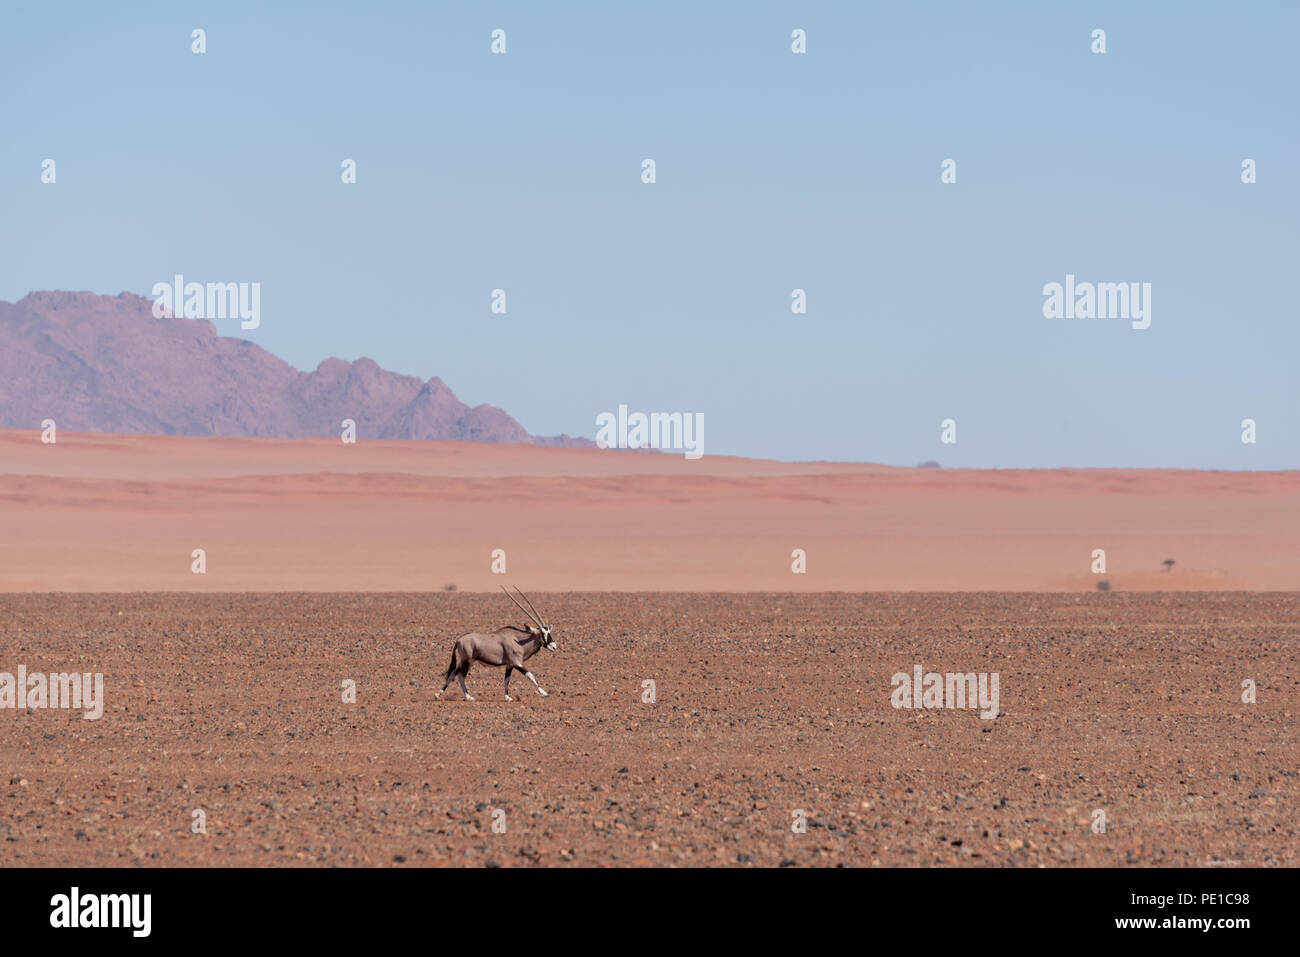 Running gemsbok antelope through open plains of african desert with red dunes in the background Stock Photo